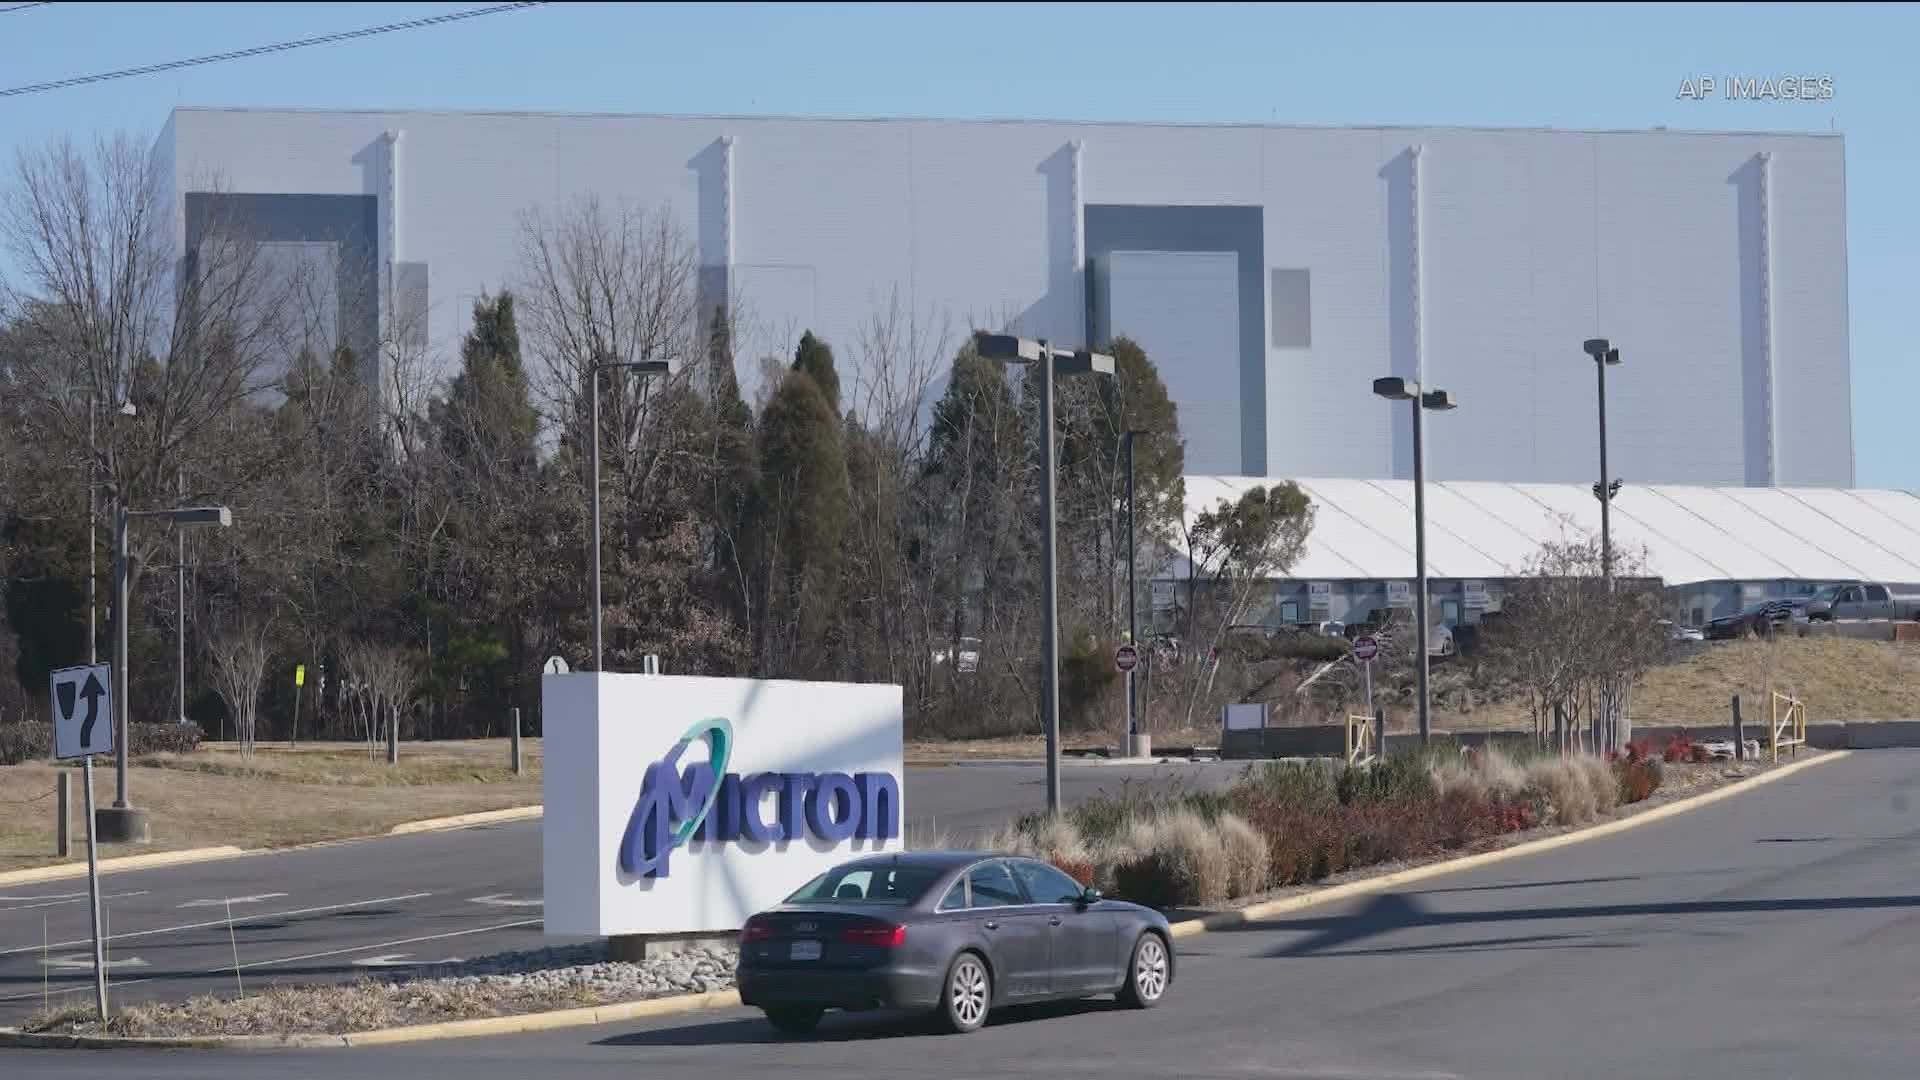 Micron Technology announced that instead of building a new factory in Lockhart, it'll take its business to upstate New York. Local officials are disappointed.